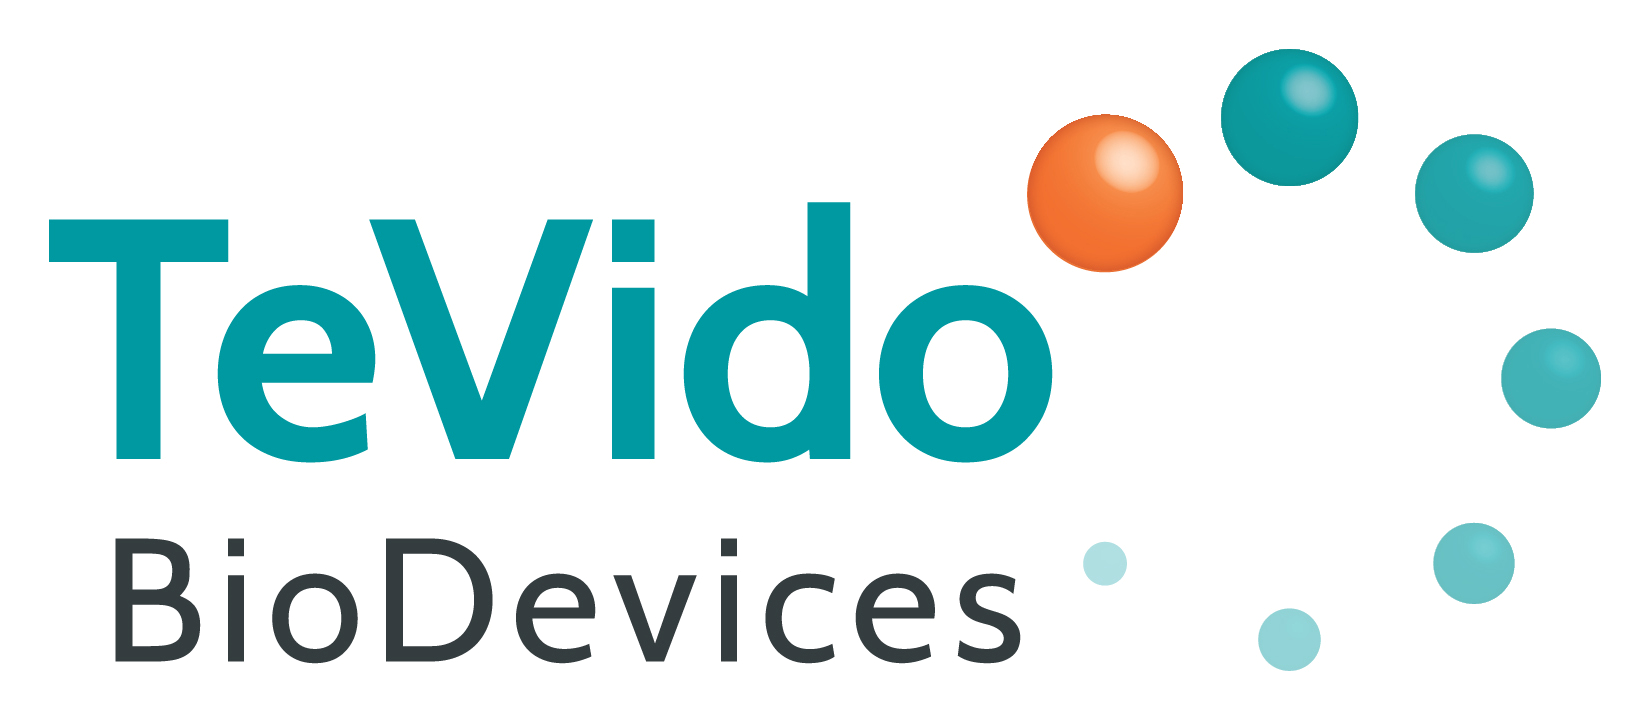 TeVido Biodevices